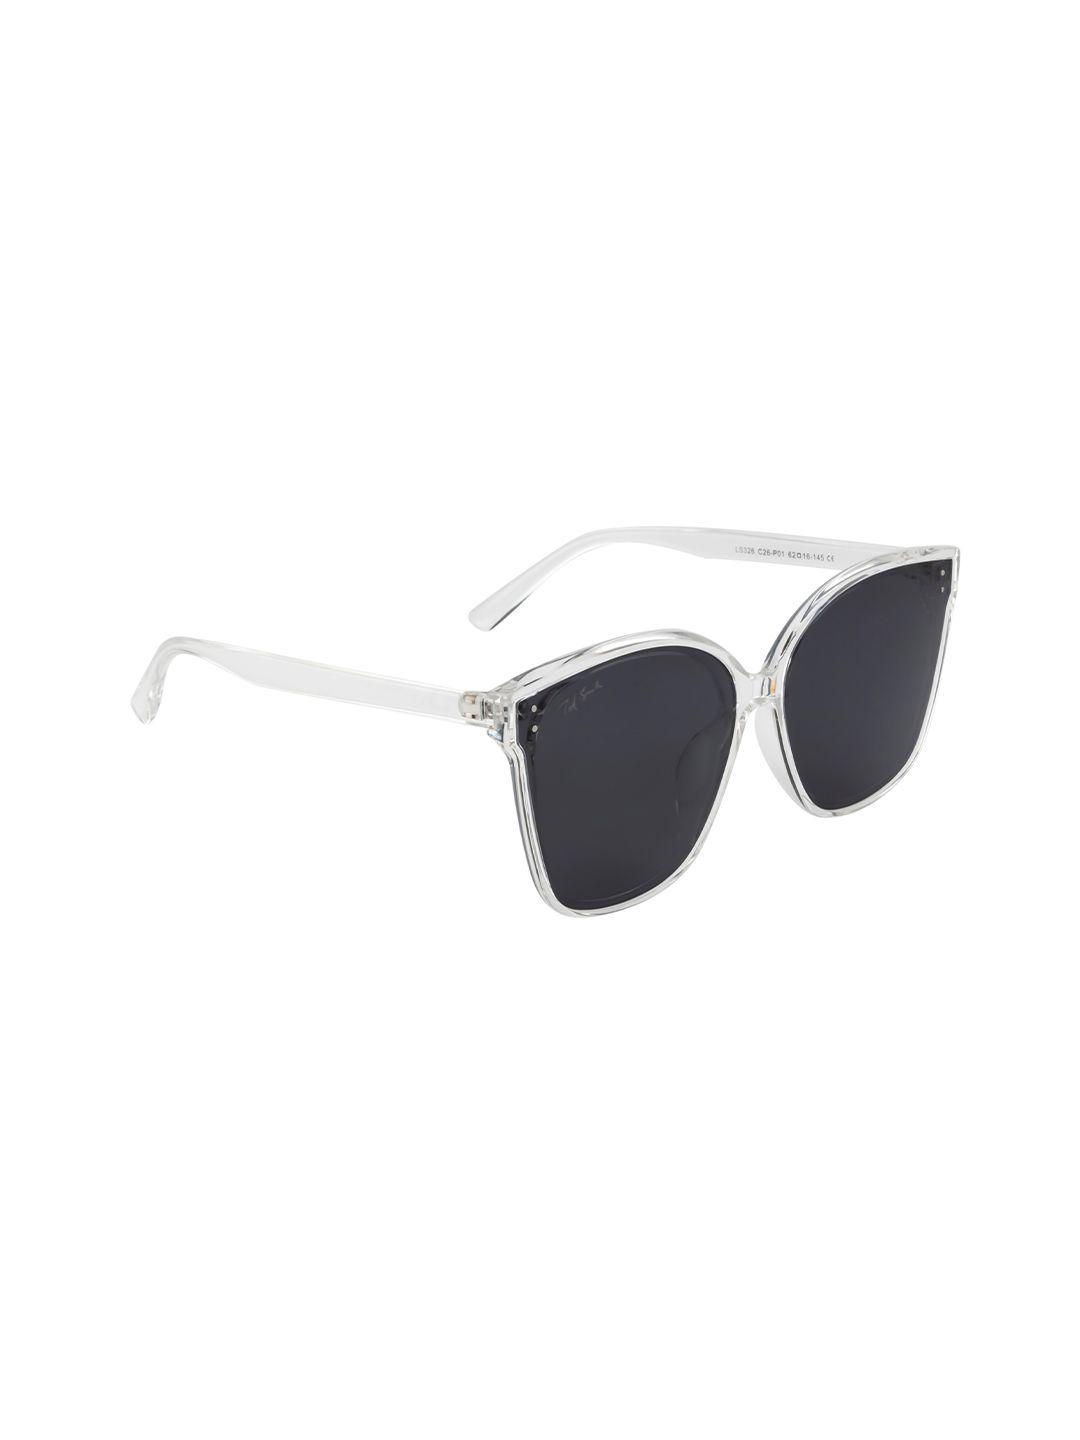 ted smith unisex black lens & white square sunglasses with uv protected lens